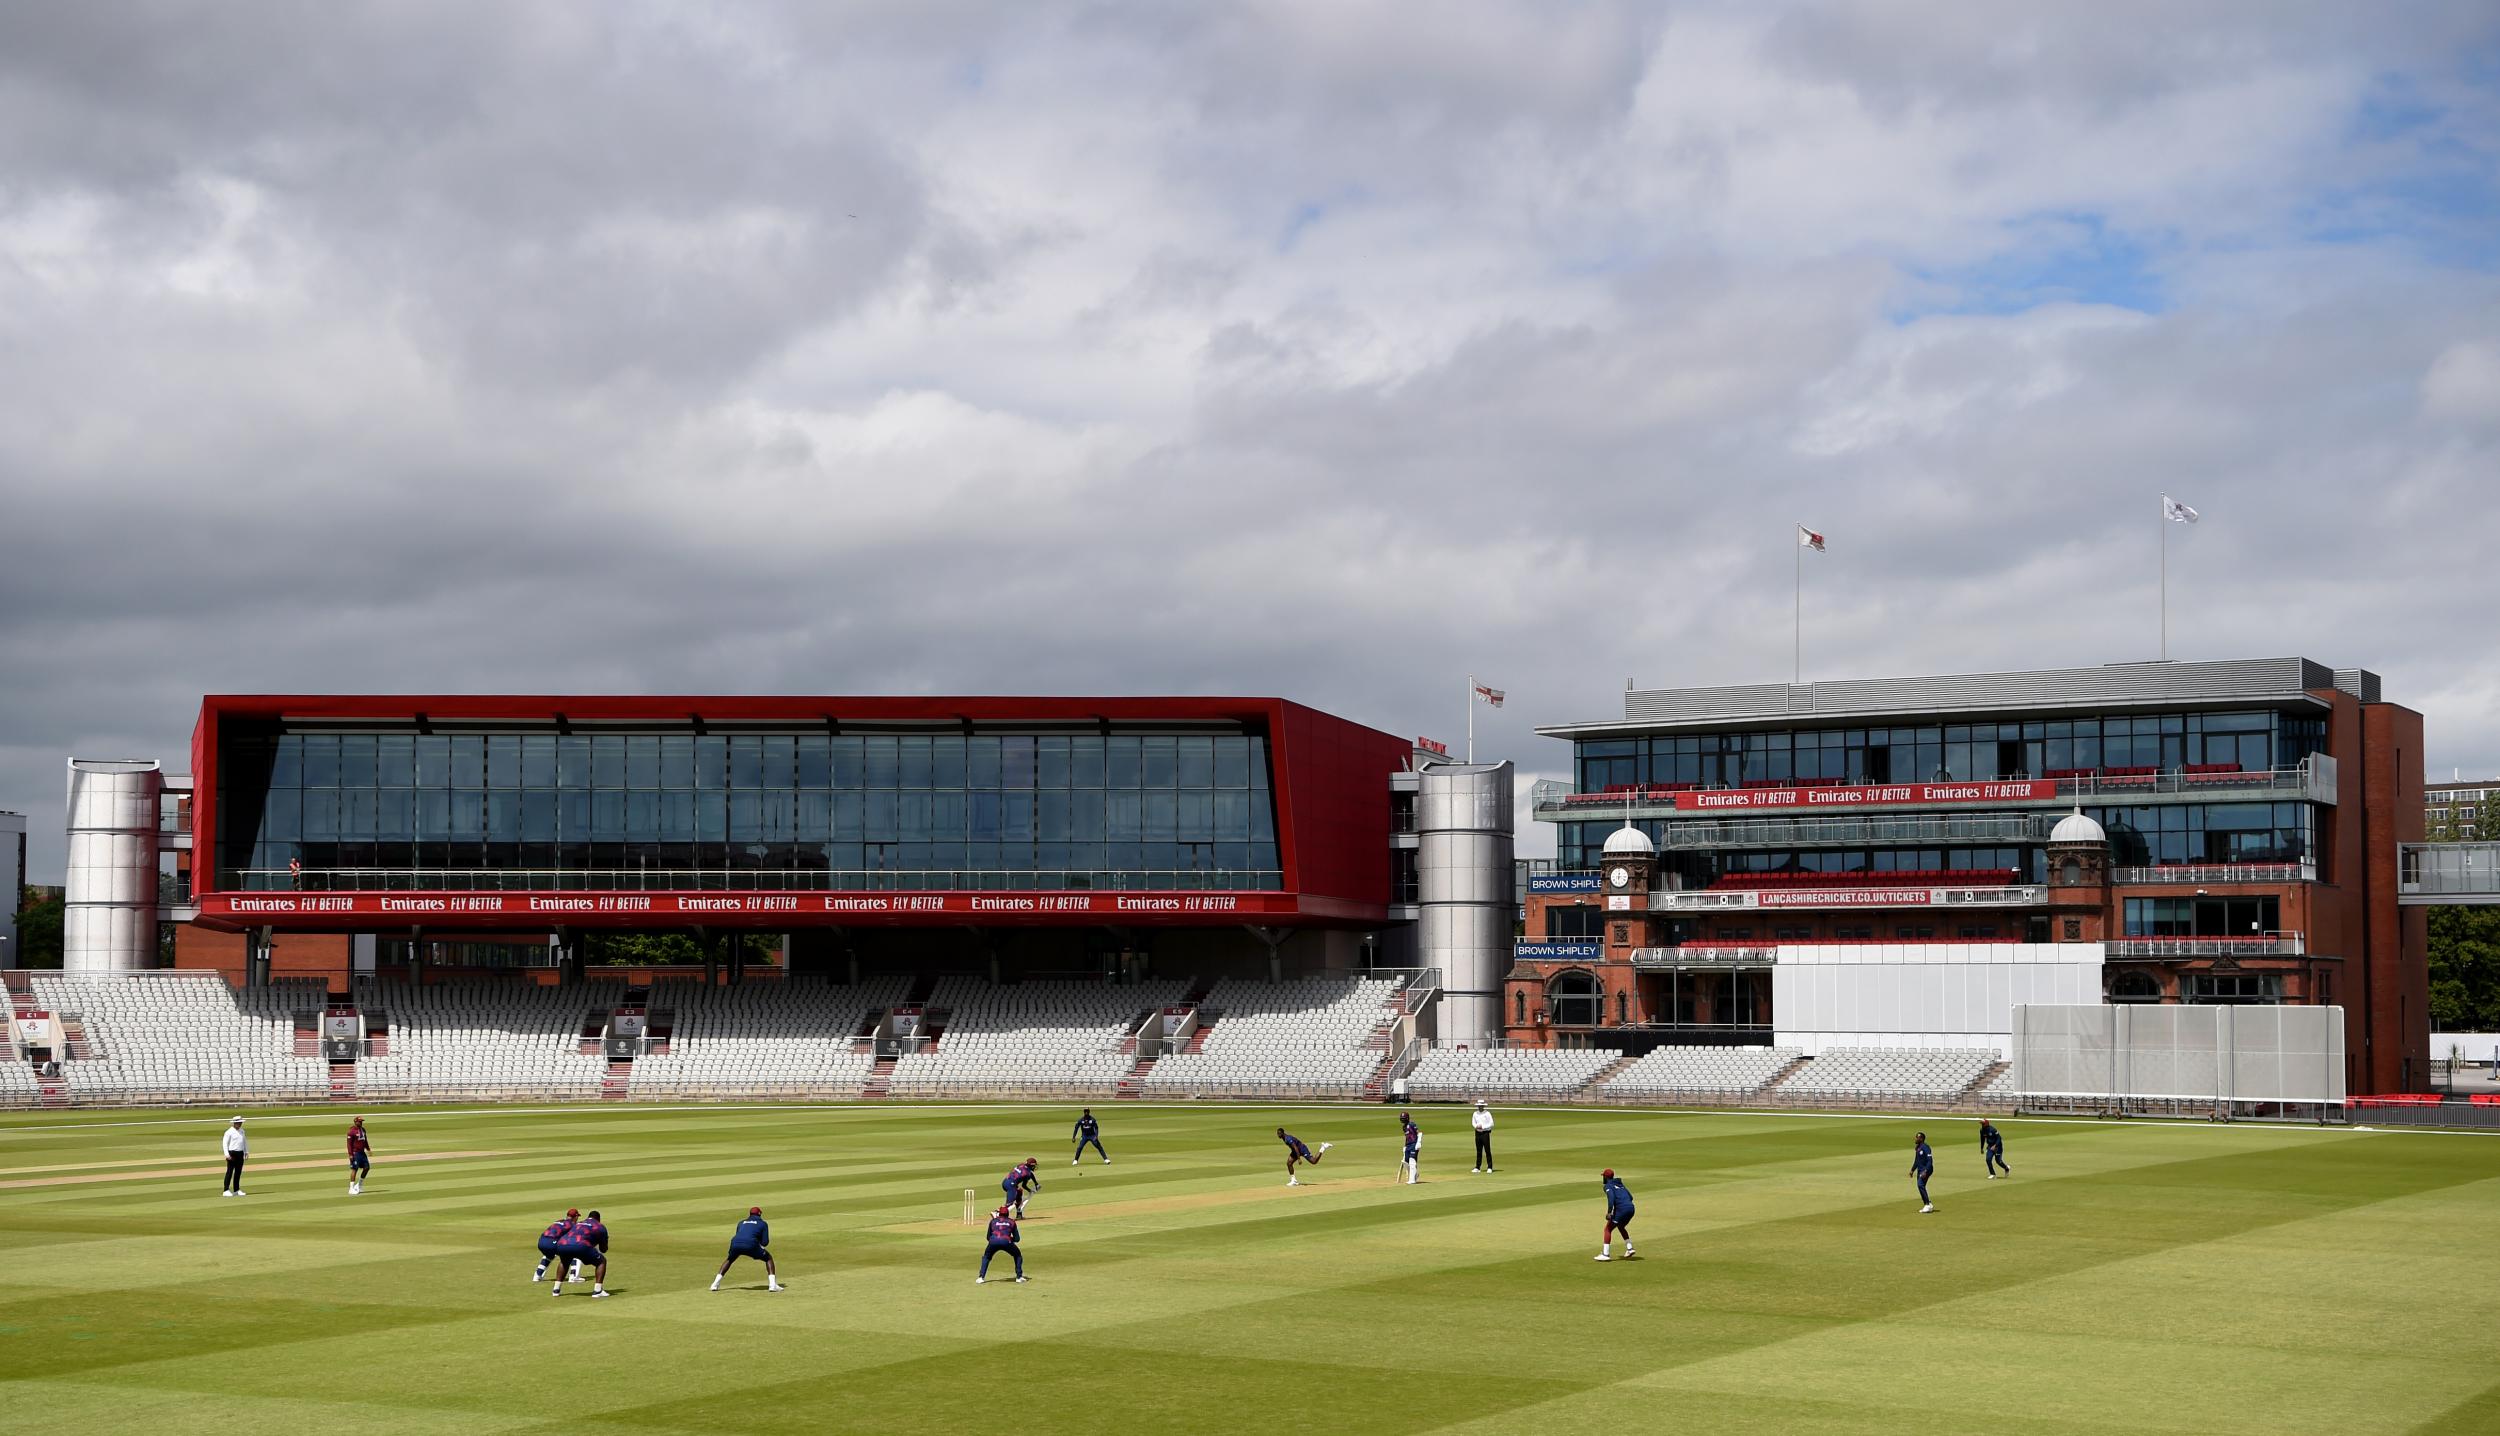 West Indies practice at Old Trafford